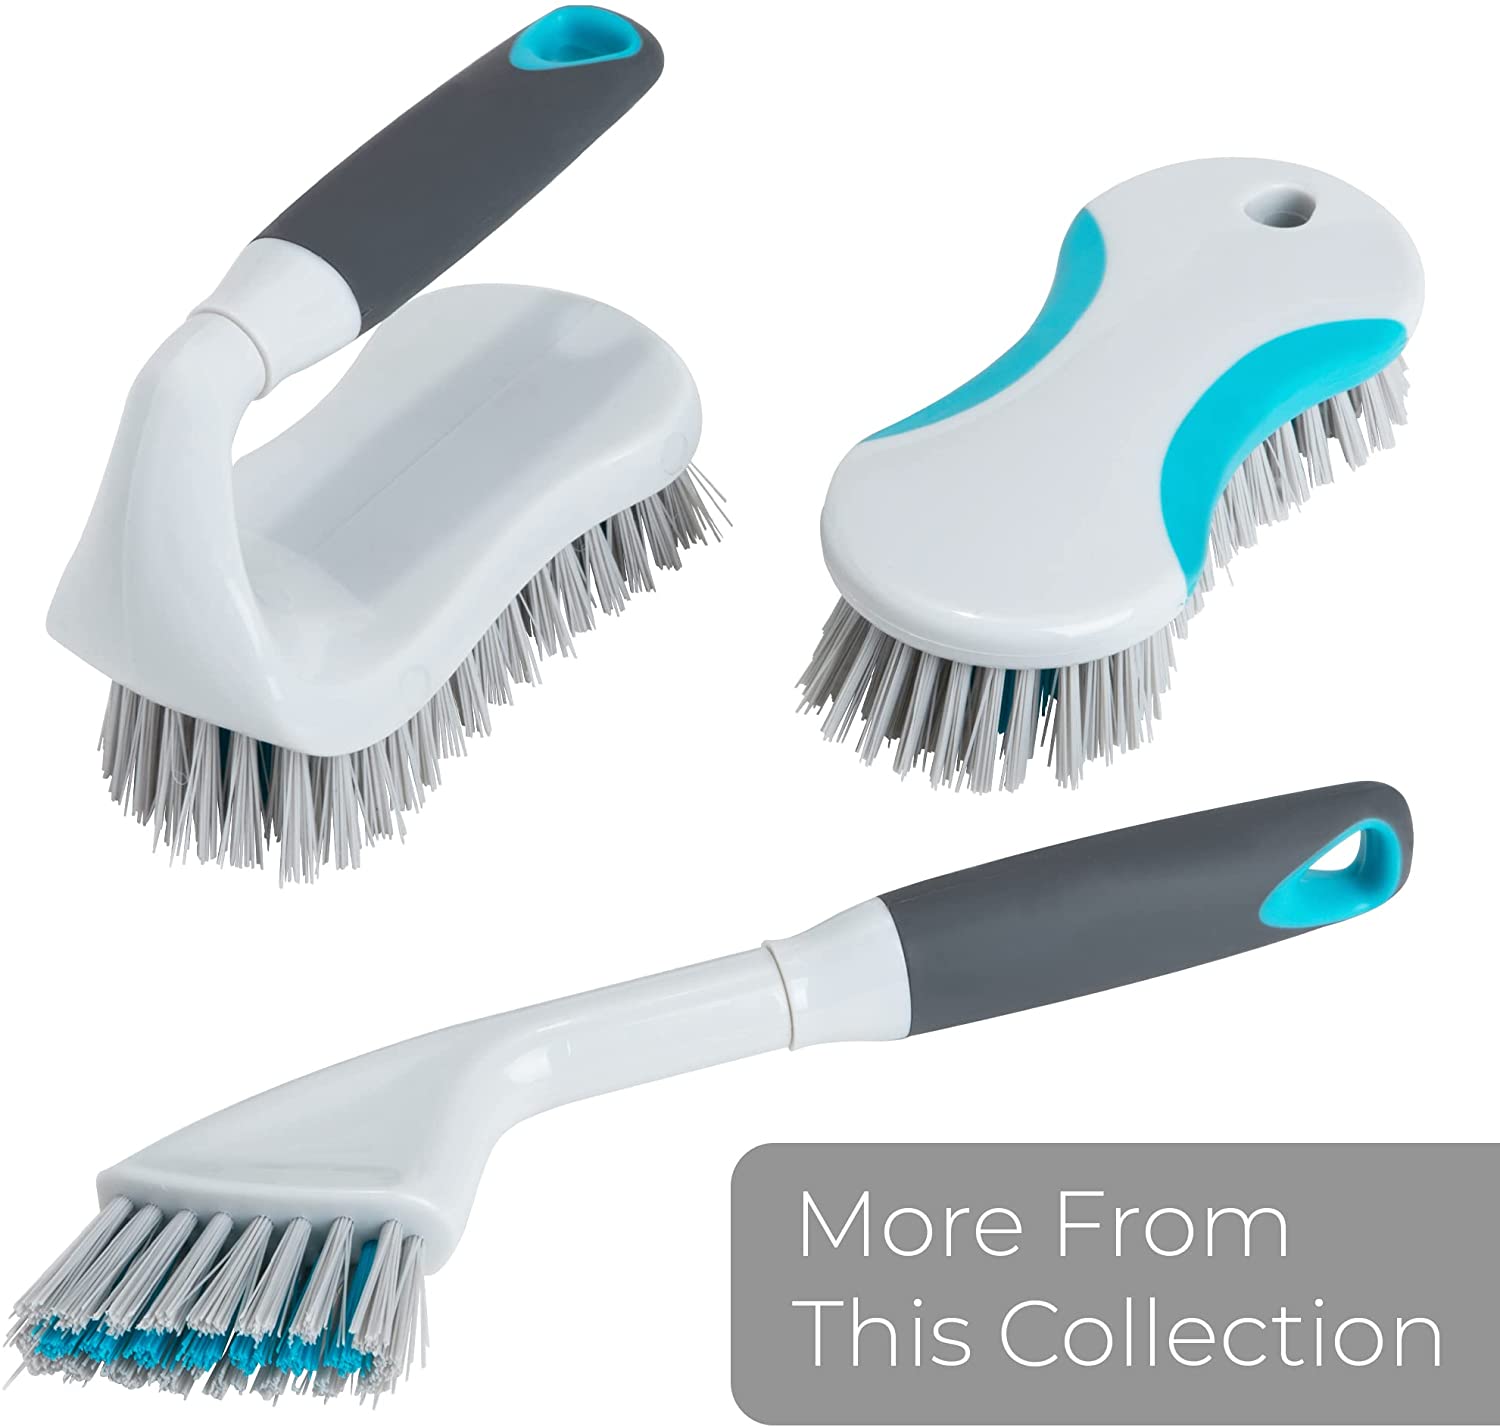 4 In 1 Cleaning Brush Shower Scrub Brush With Water Spray Design